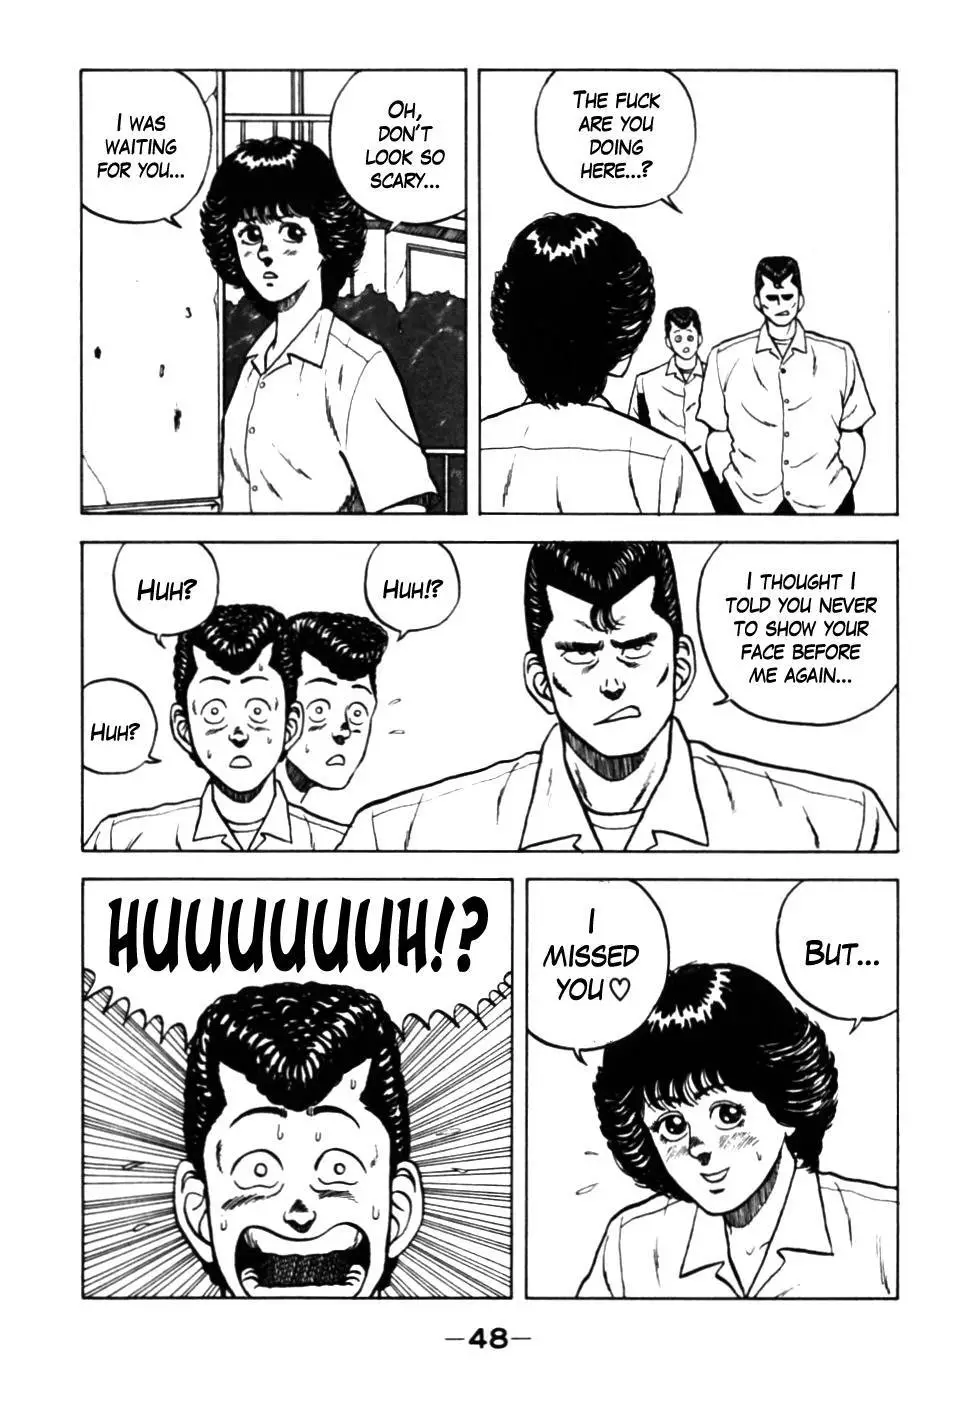 Be-Bop High School - 24 page p_00004